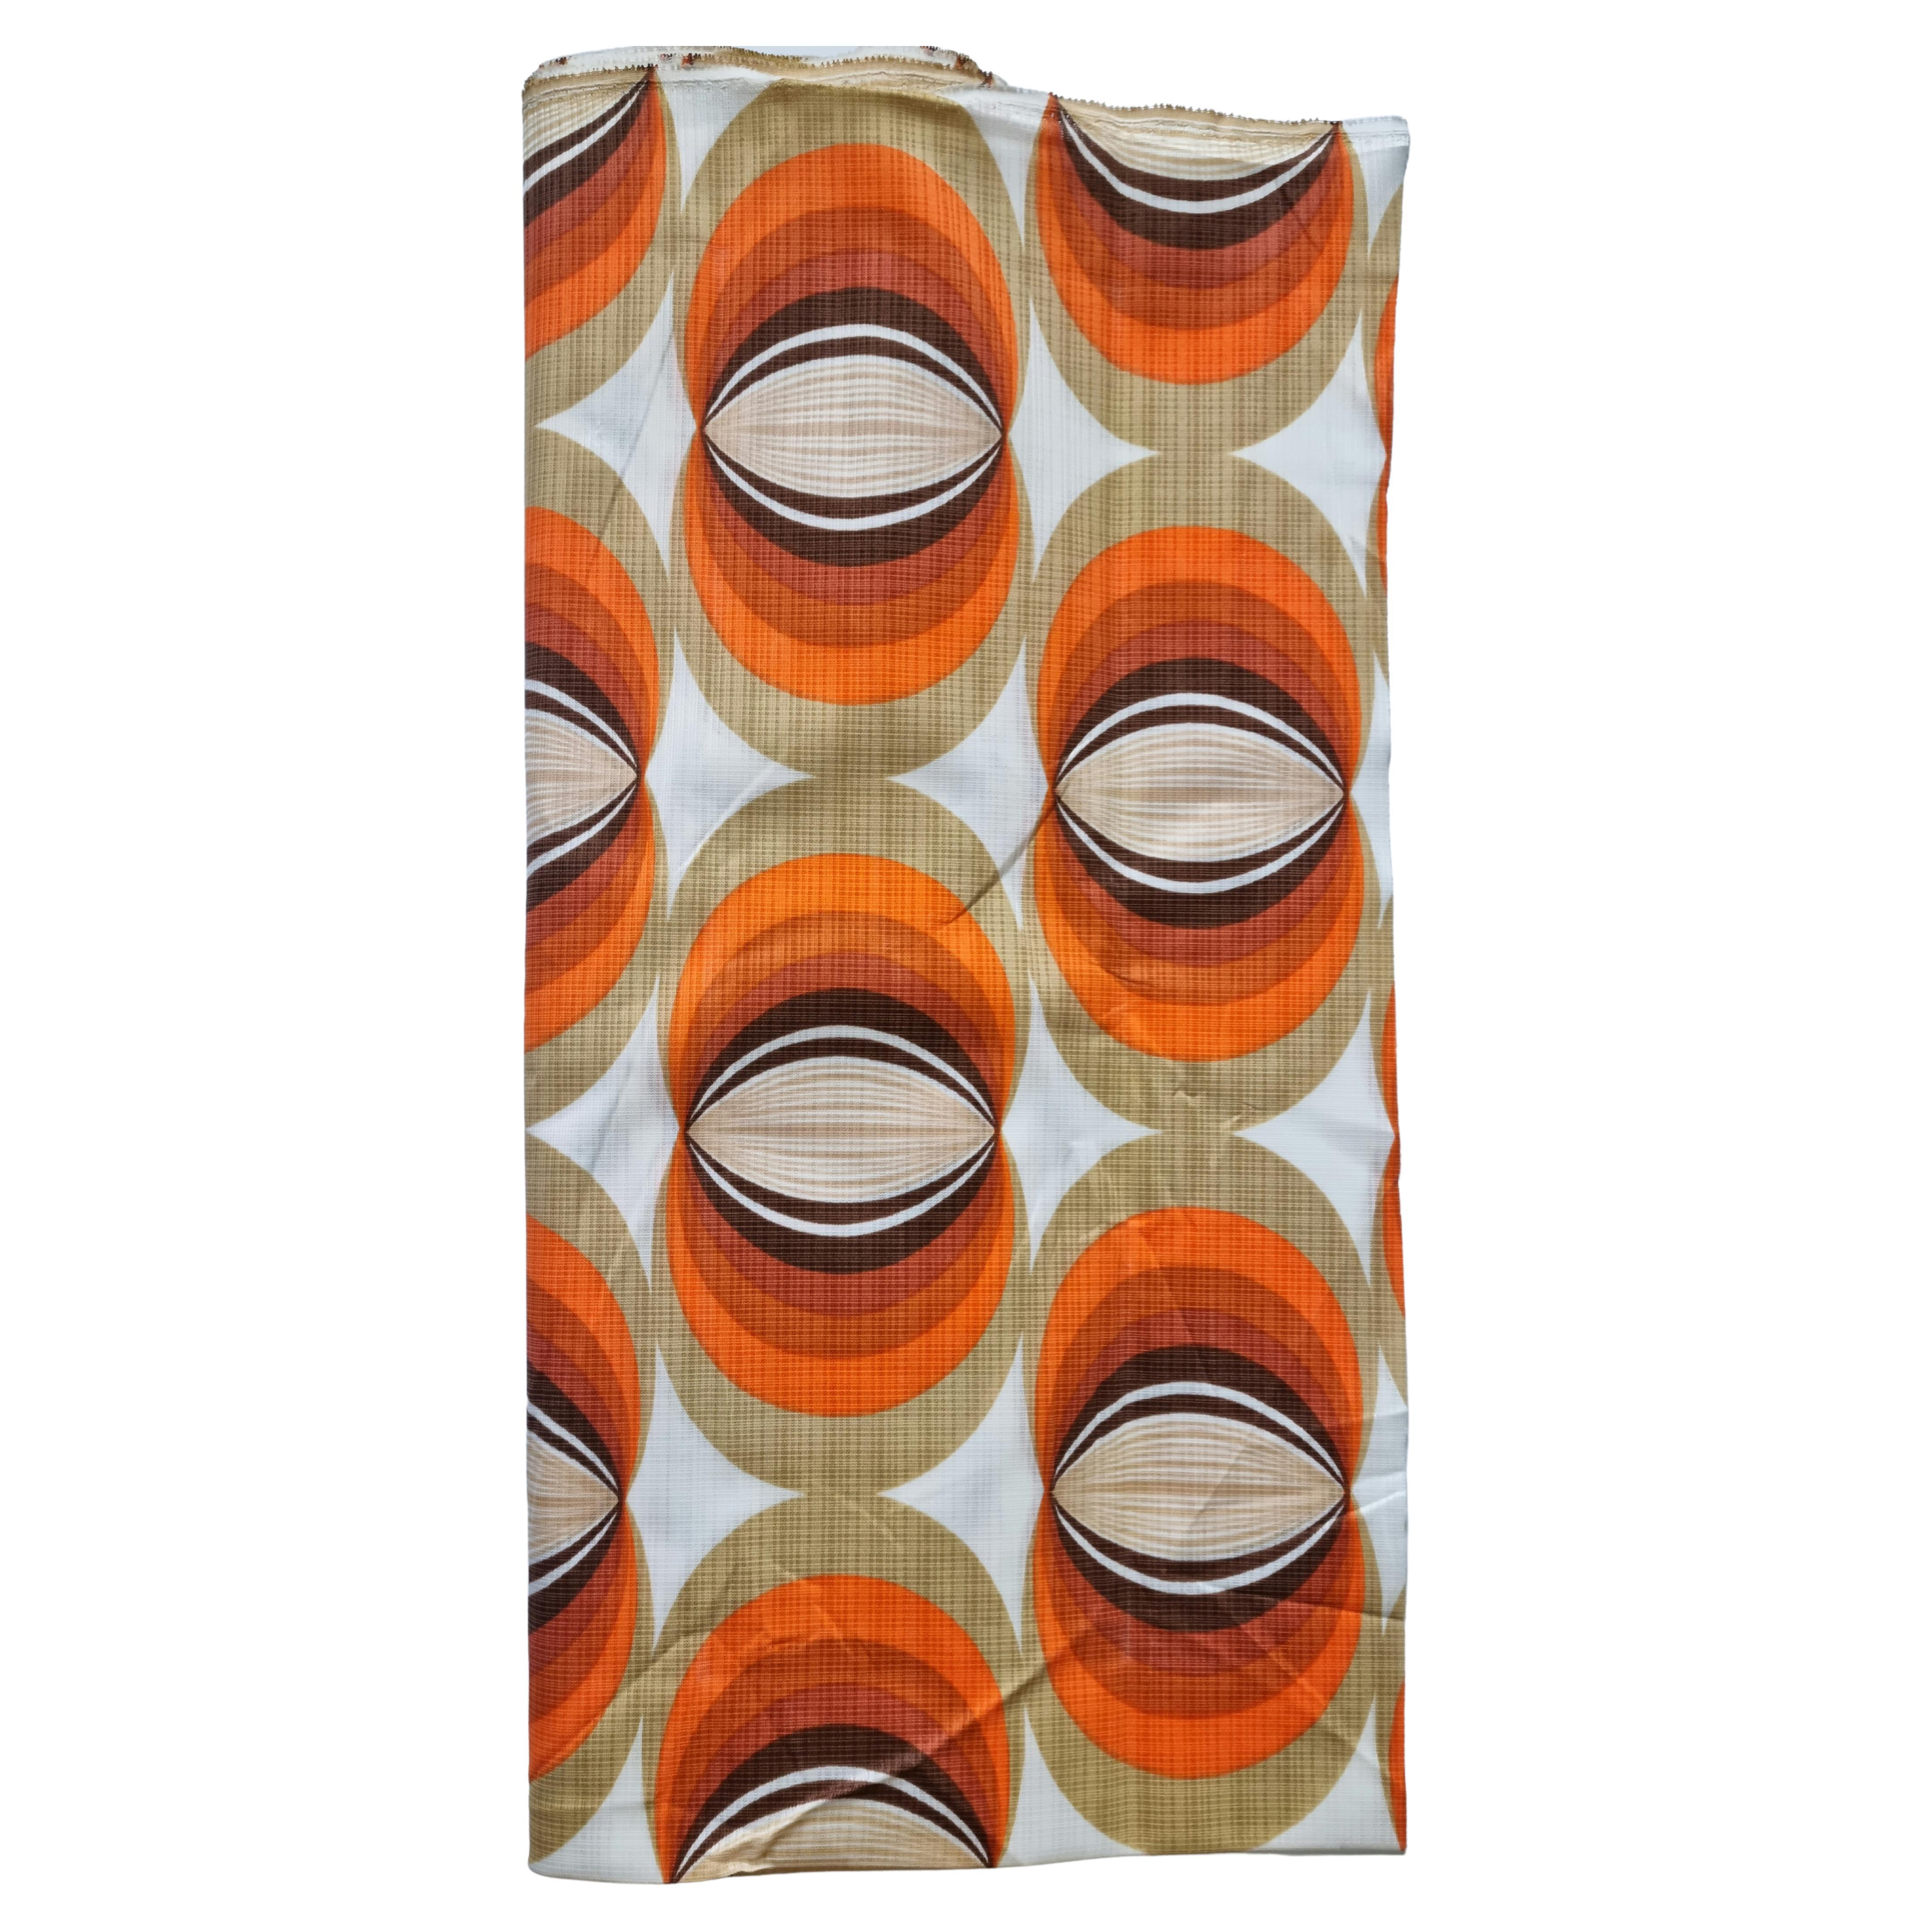 Midcentury Large Cloth, Fabric or Textile in Style of Panton Verner, 1960s